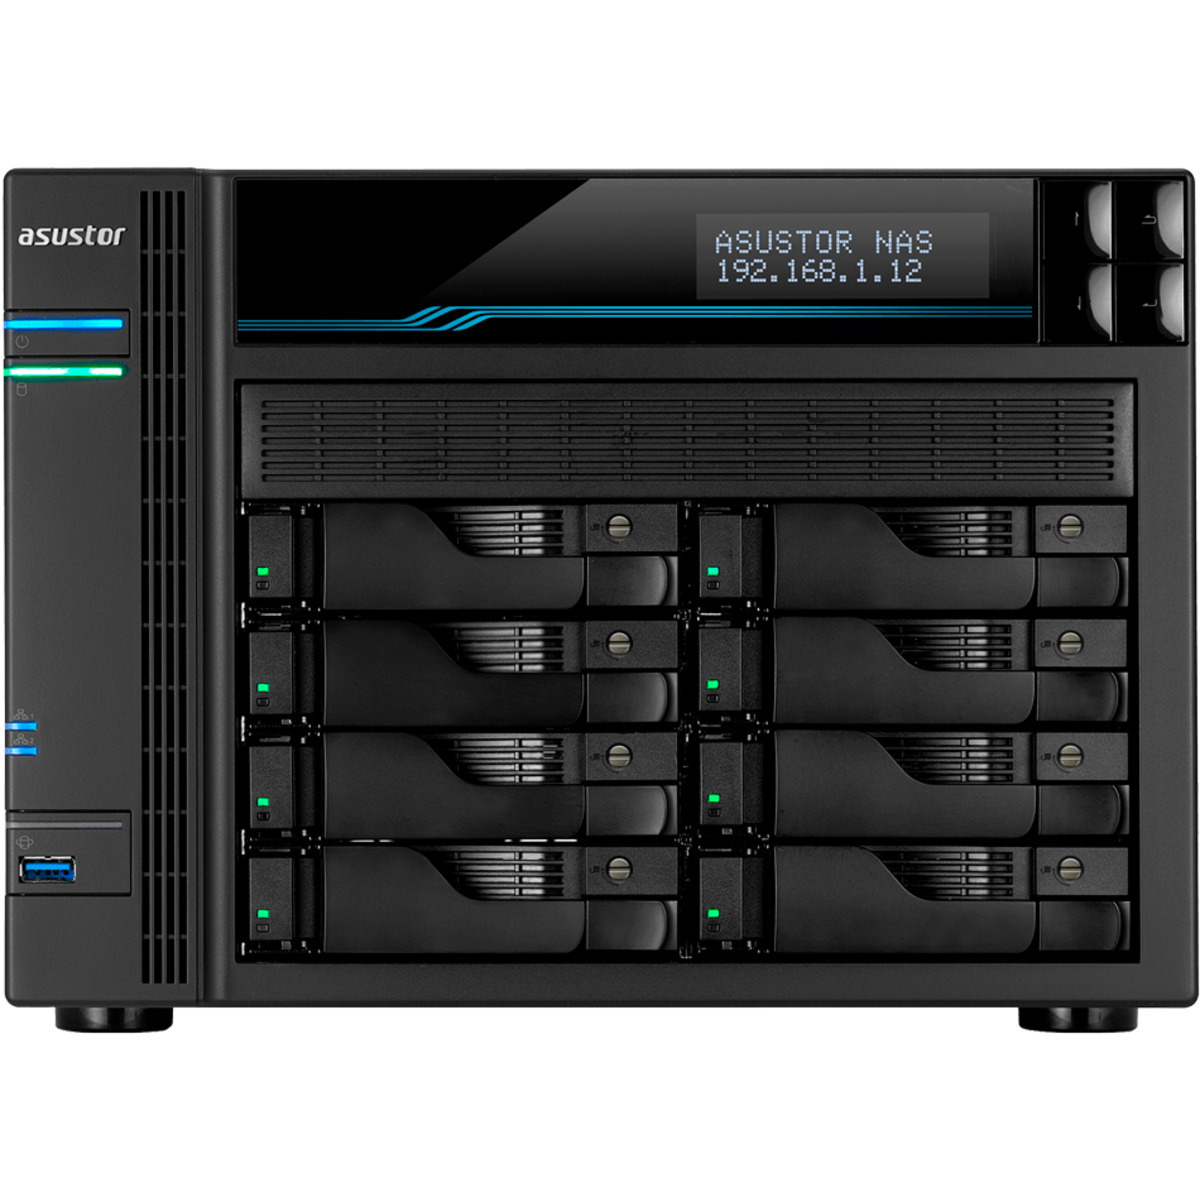 ASUSTOR AS6508T Lockerstor 8 112tb 8-Bay Desktop Multimedia / Power User / Business NAS - Network Attached Storage Device 8x14tb Seagate IronWolf Pro ST14000NT001 3.5 7200rpm SATA 6Gb/s HDD NAS Class Drives Installed - Burn-In Tested - ON SALE - FREE RAM UPGRADE AS6508T Lockerstor 8